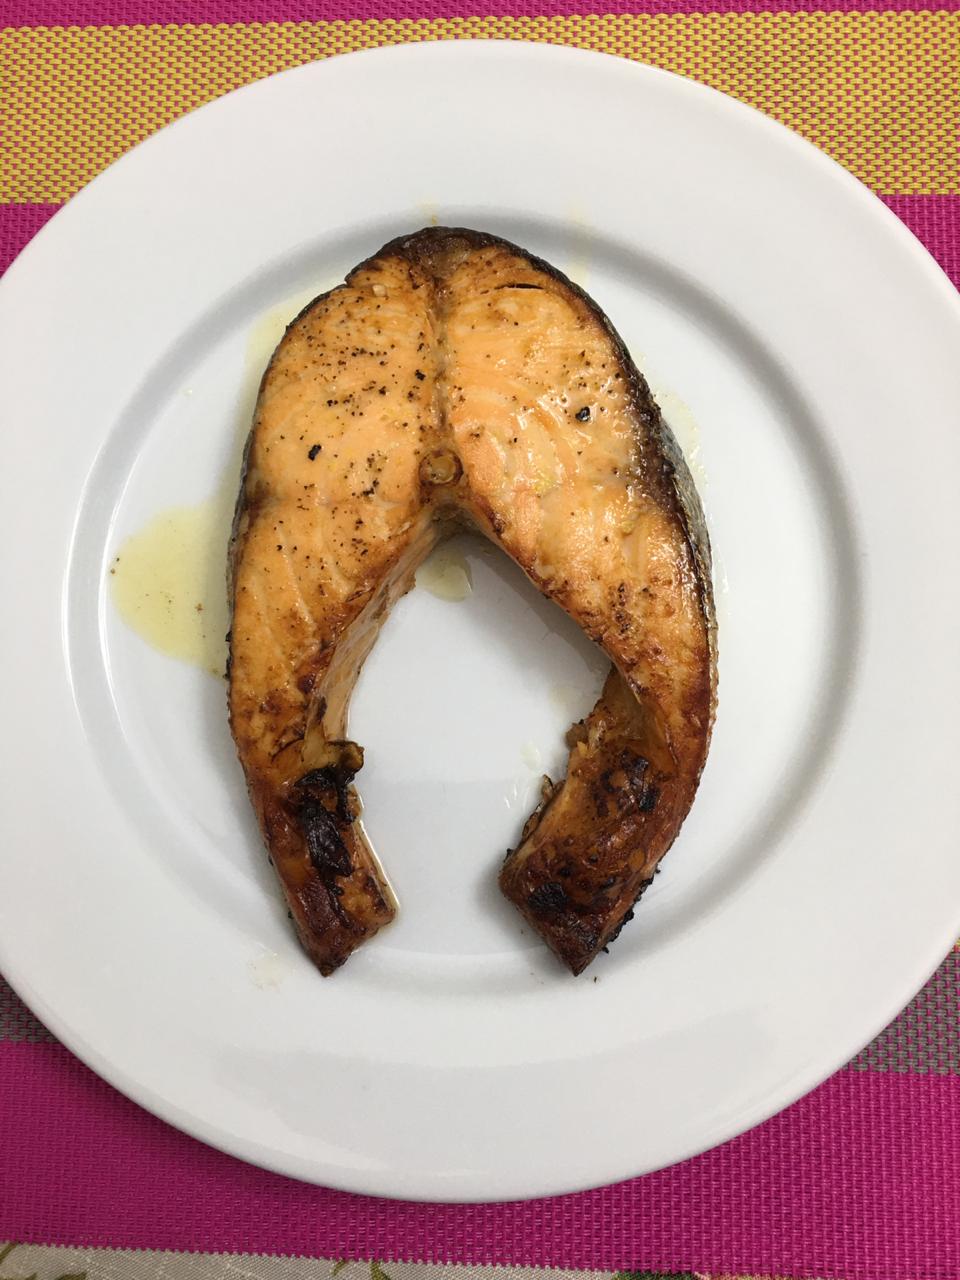 Buttered Salmon in Garlic and Lemon